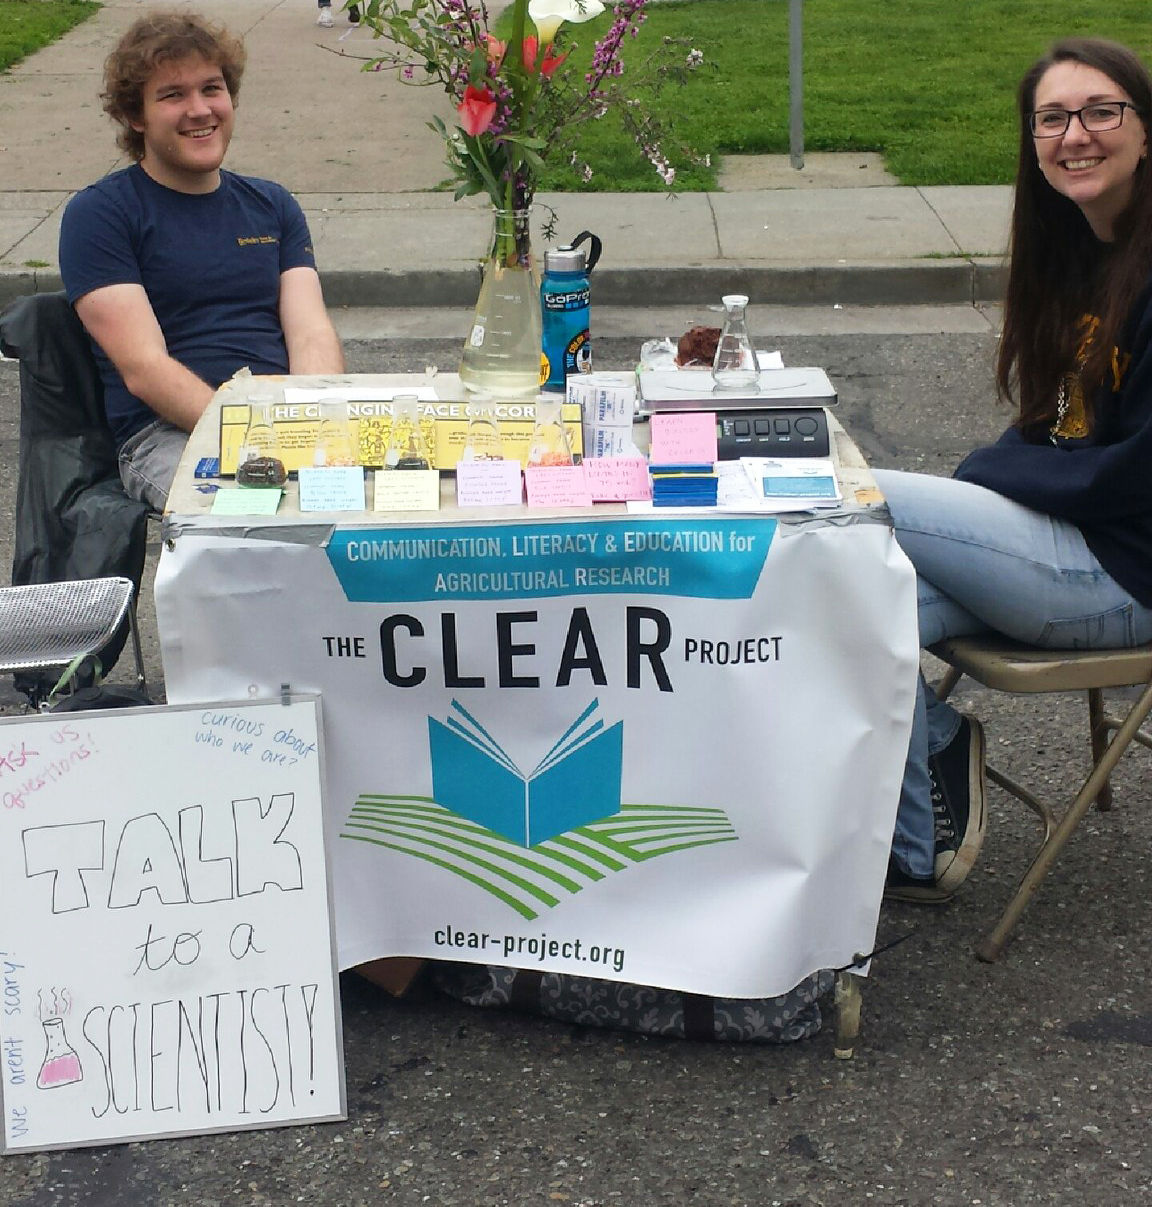 The Clear Project representatives can be found educating the public at the local farmers market with their "talk to a scientist" poster